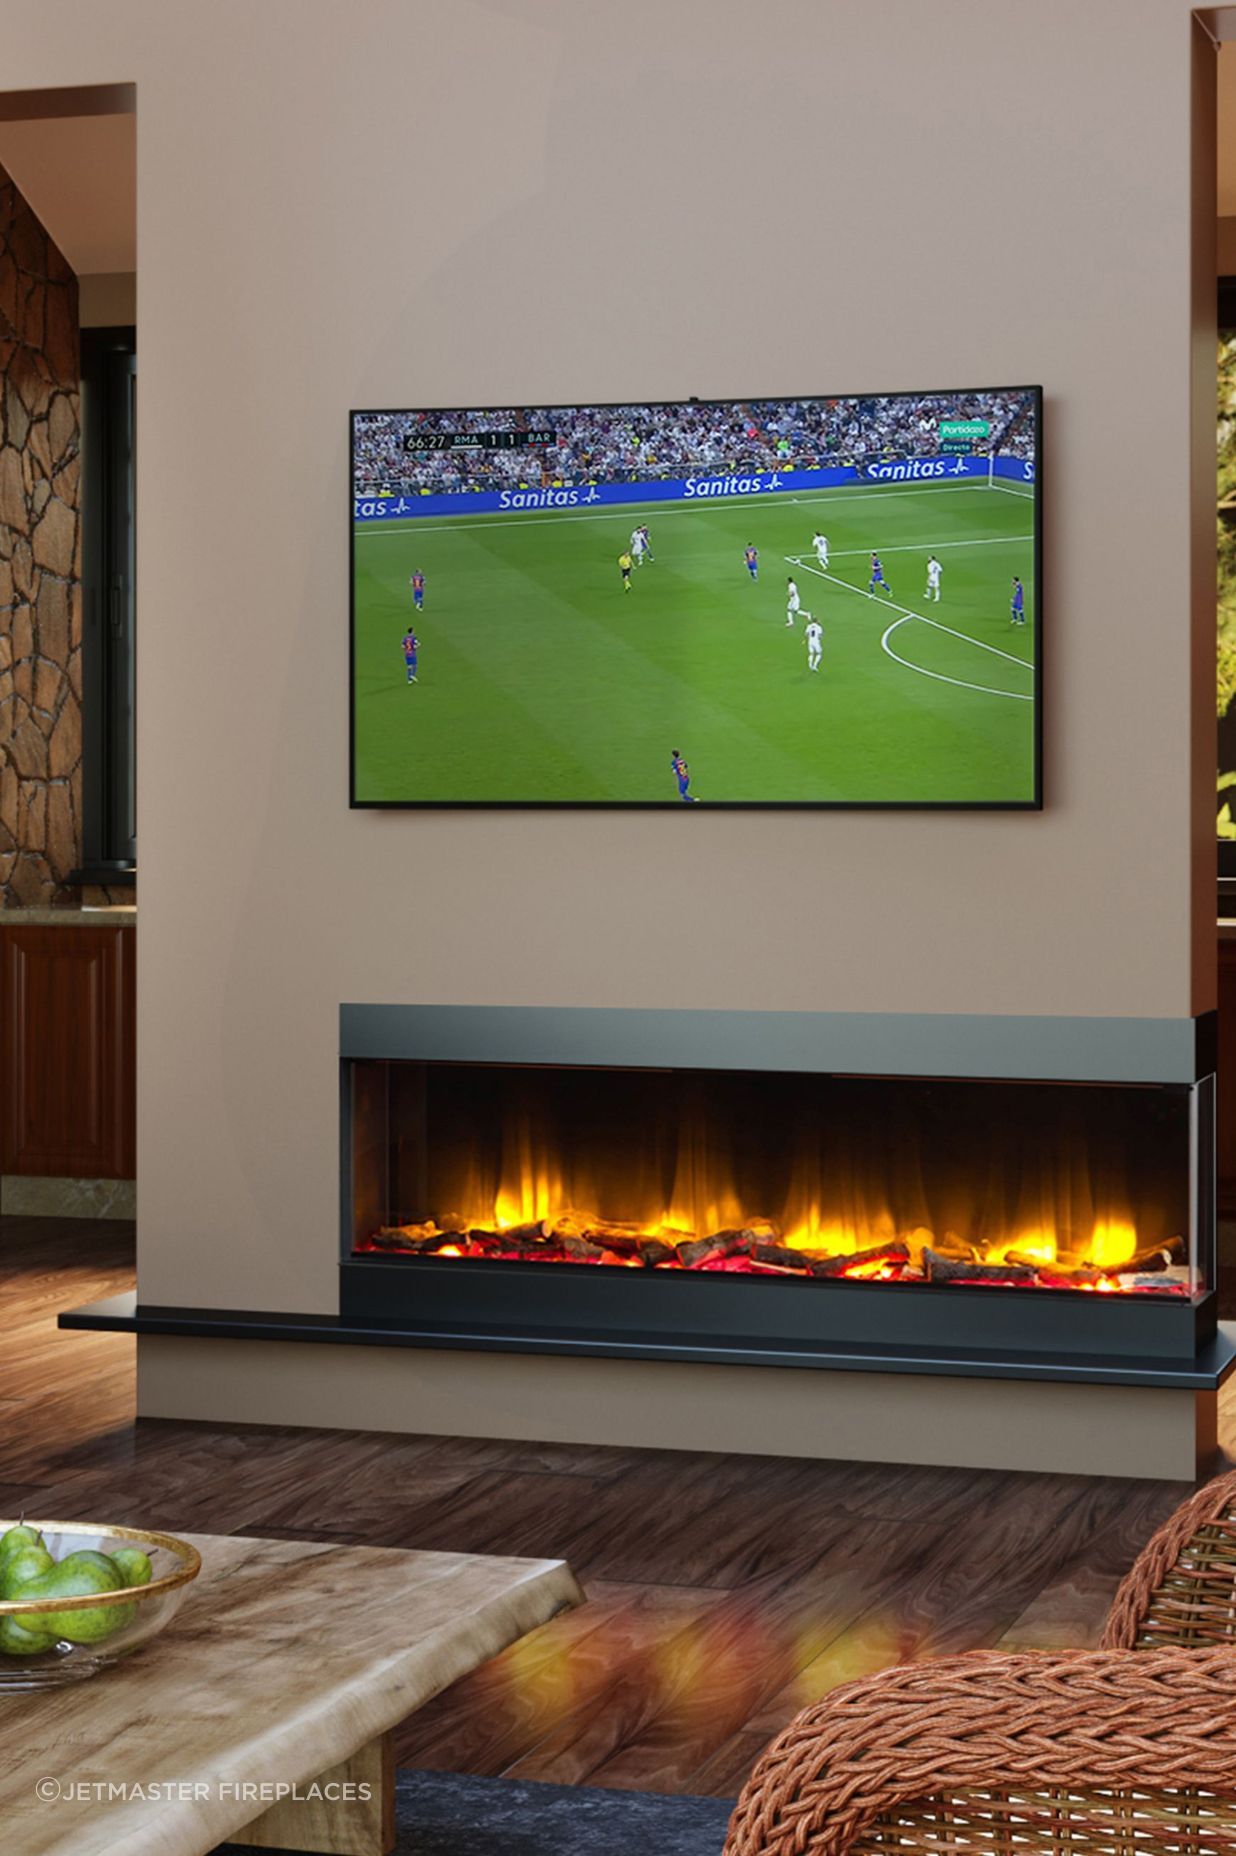 With features like adjustable flame heights and multiple colour options, electric fireplaces offer a customisable atmosphere to suit various moods and occasions.